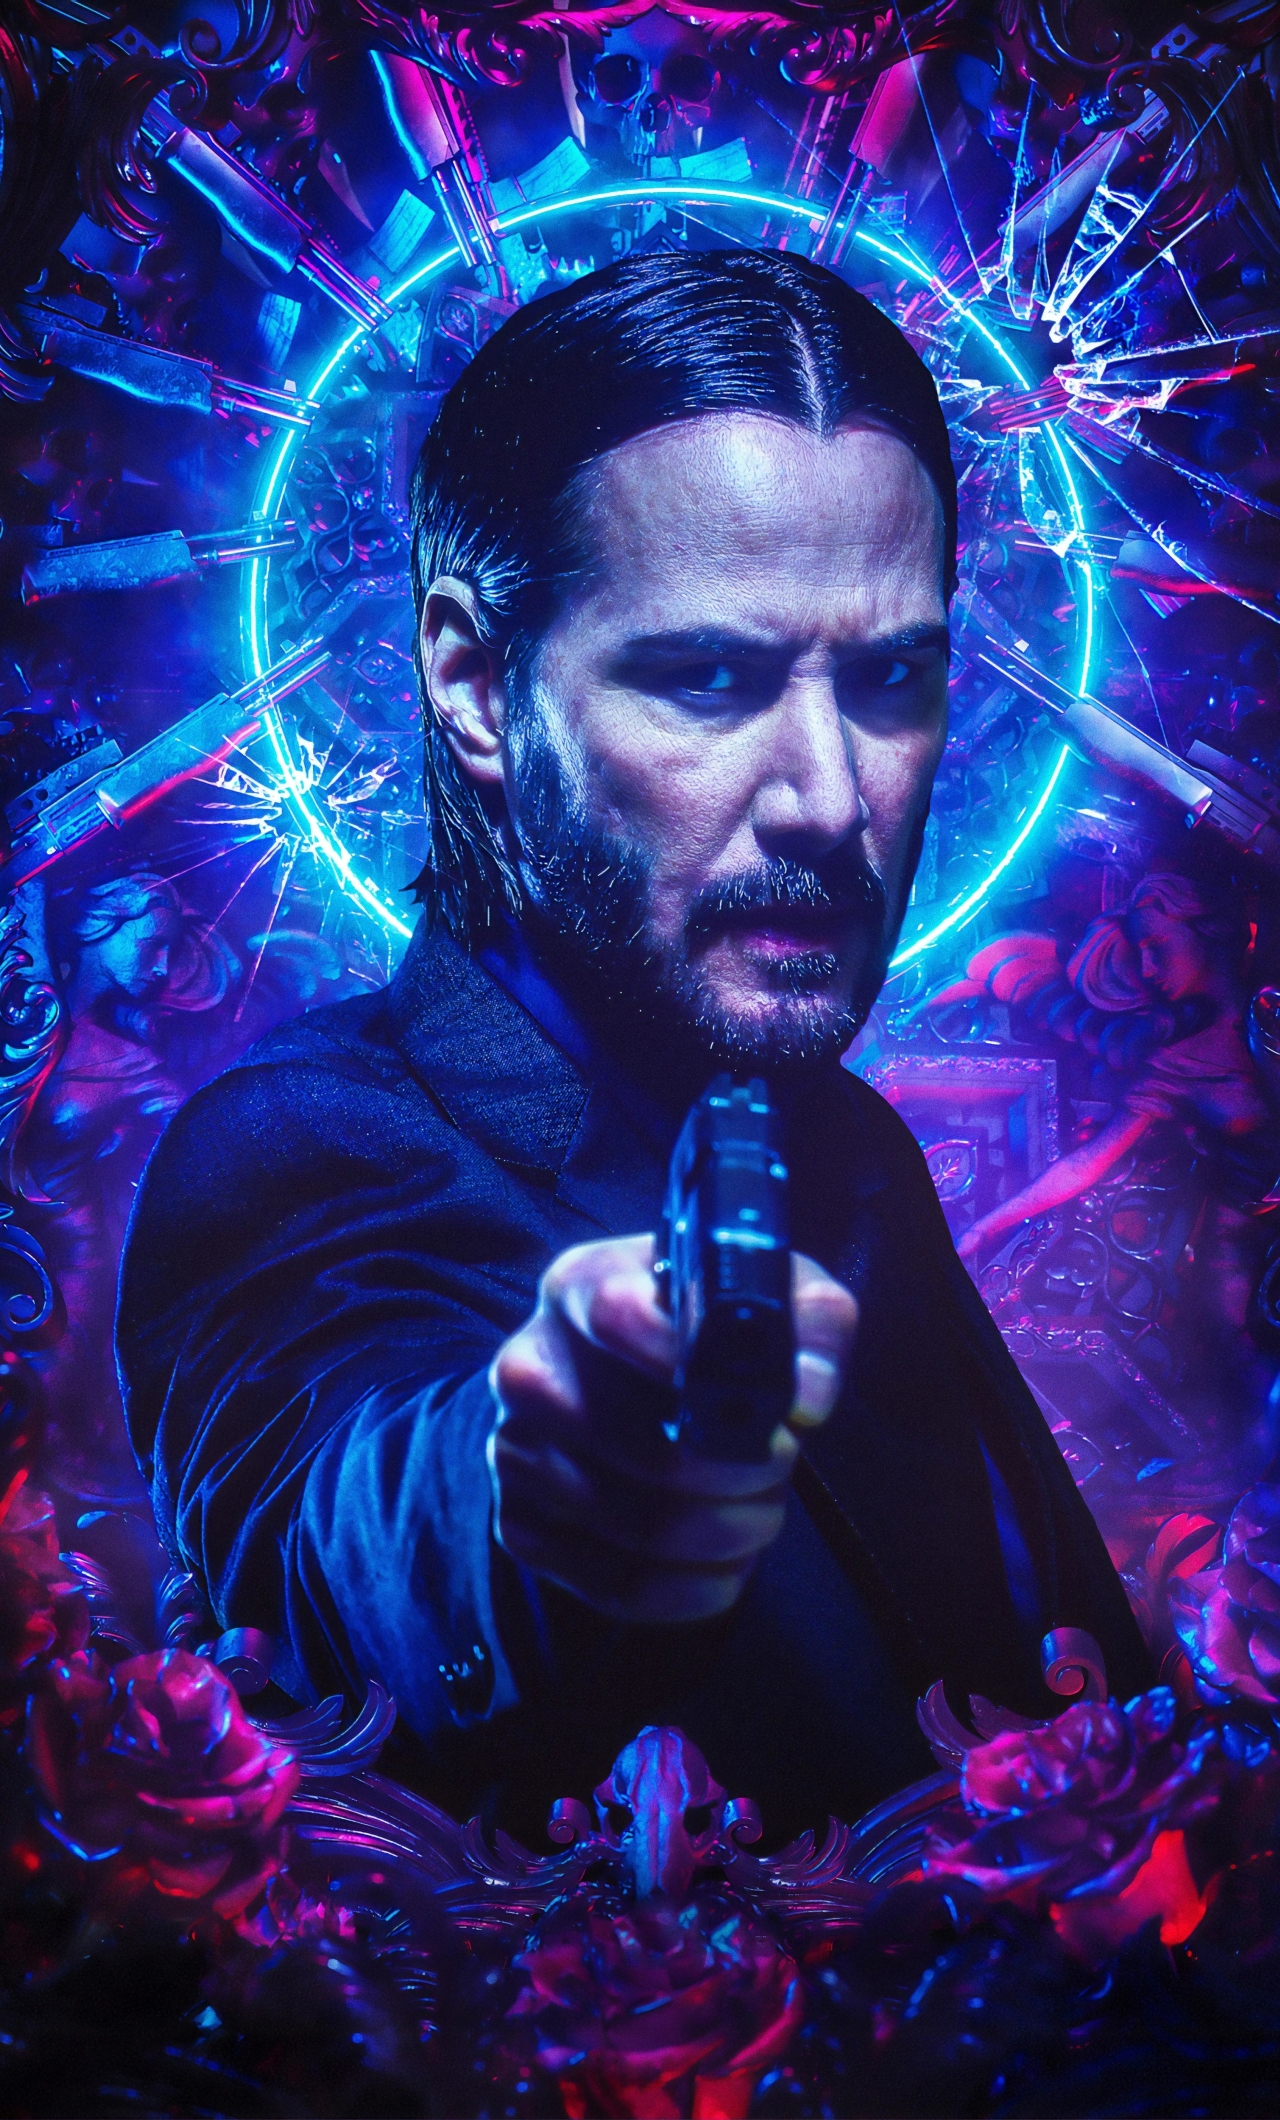 John Wick 3 Parabellum Poster Wallpaper Hd Movies 4k Wallpapers Images And Photos Finder 1154